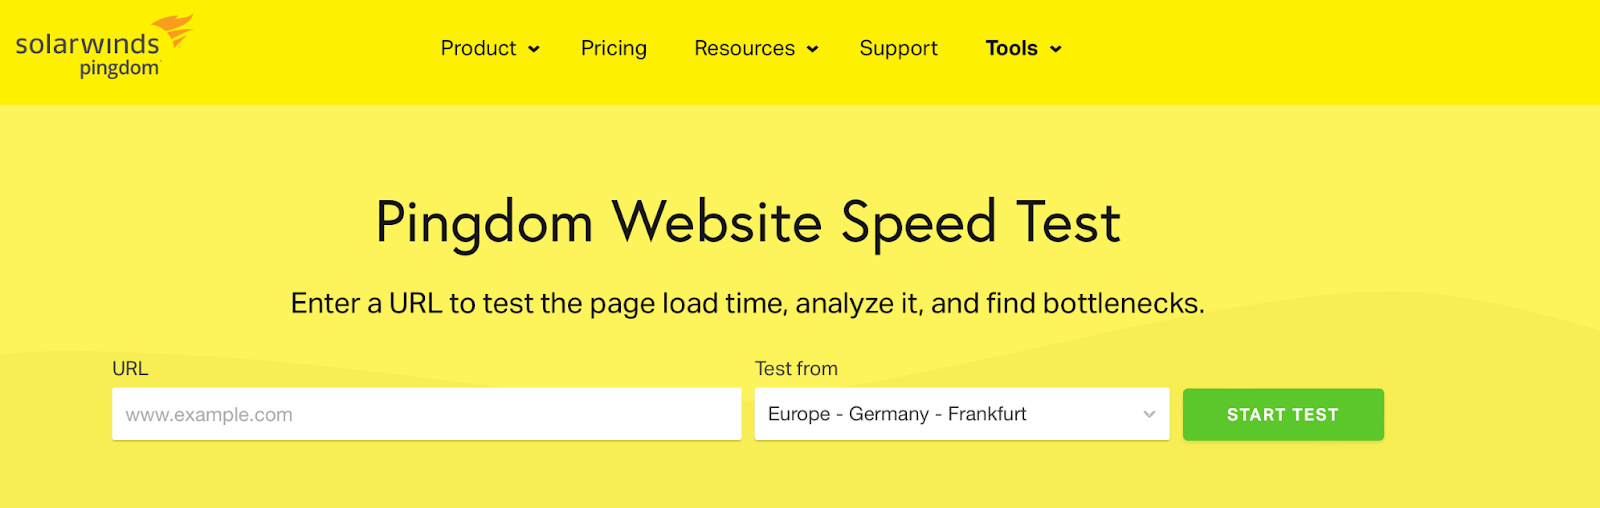 A tool like Pingdom can measure site speed and page load time.